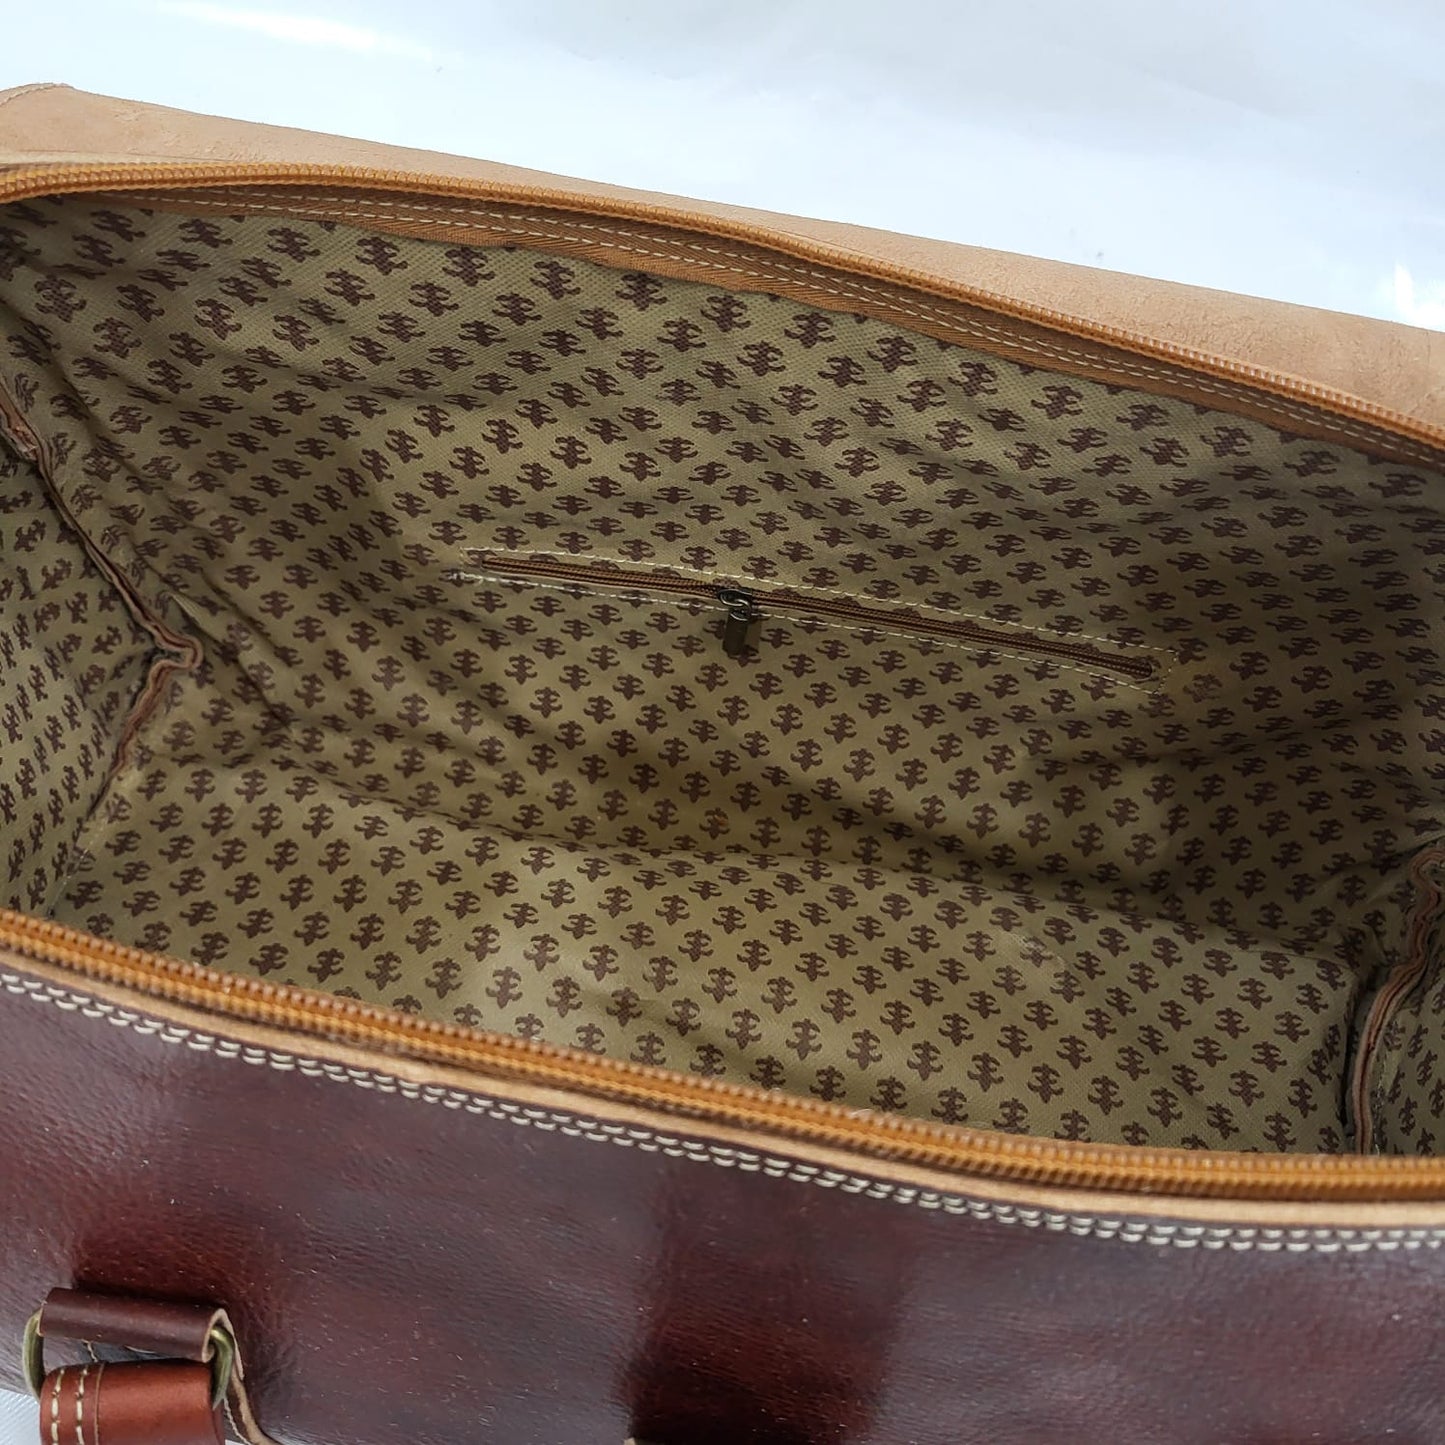 Experience Luxury in Every Detail Moroccan Leather Travel Bags for Men